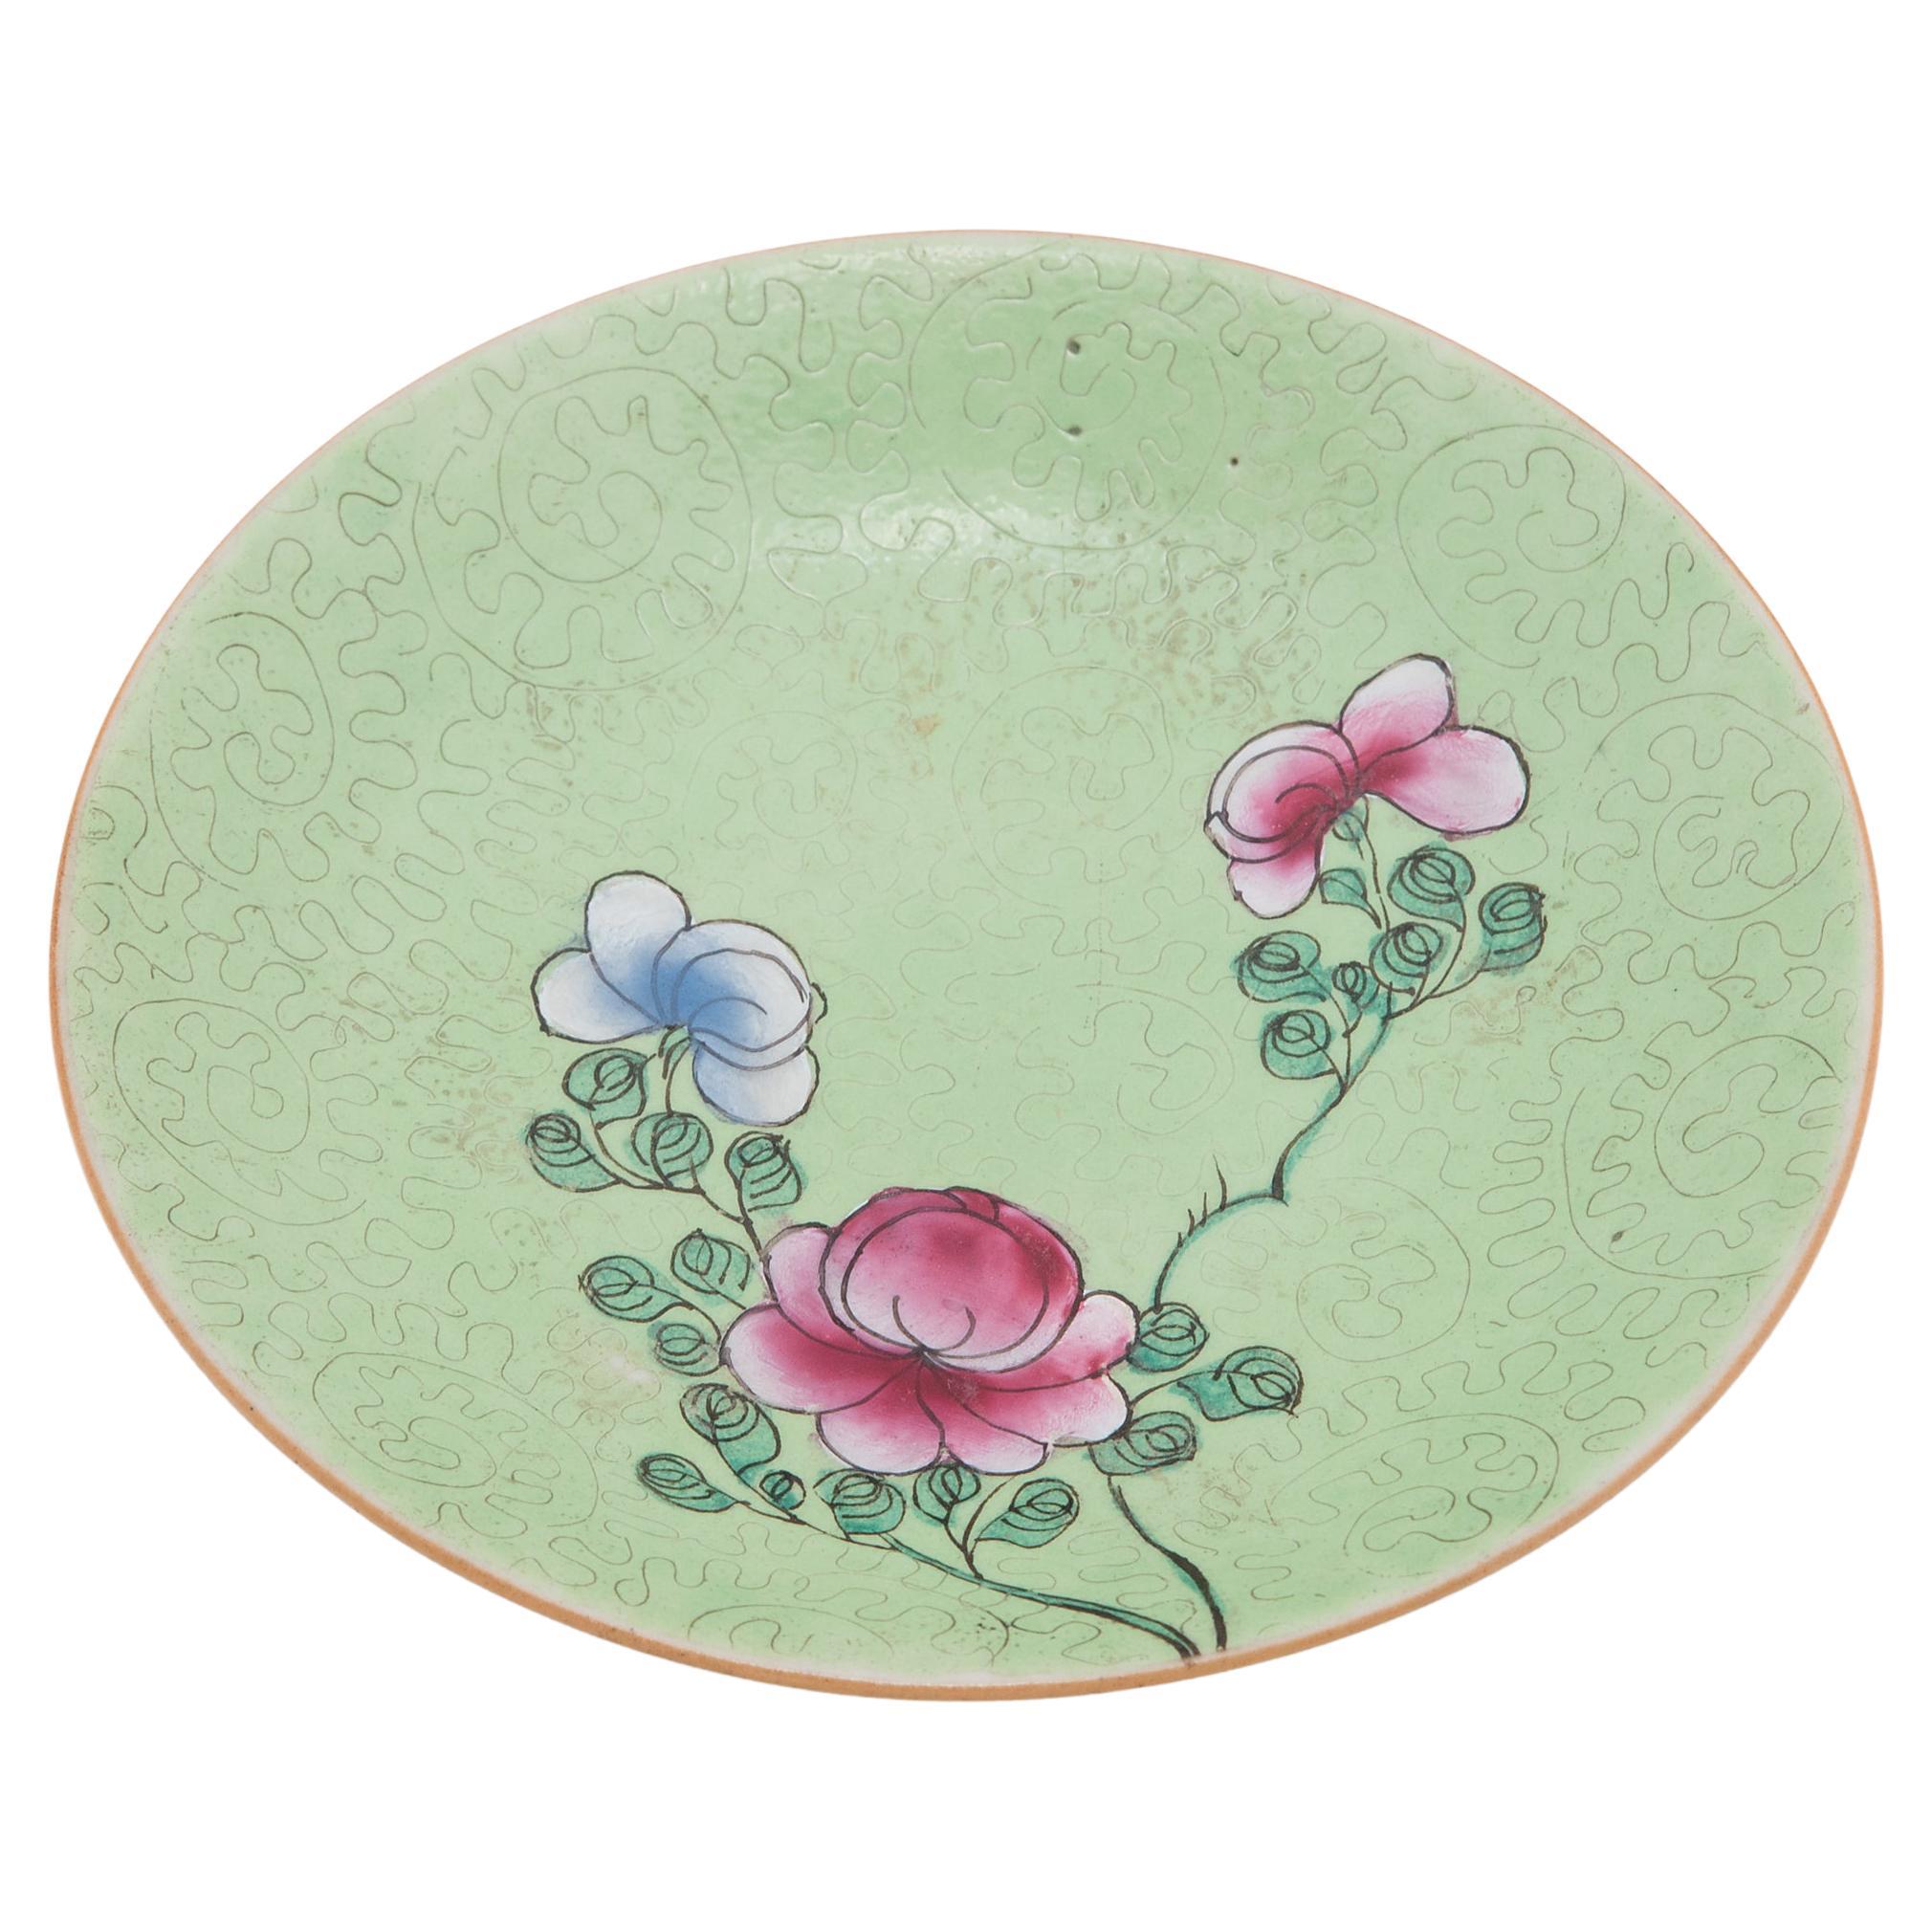 Chinese Green Enameled Plate with Orchids